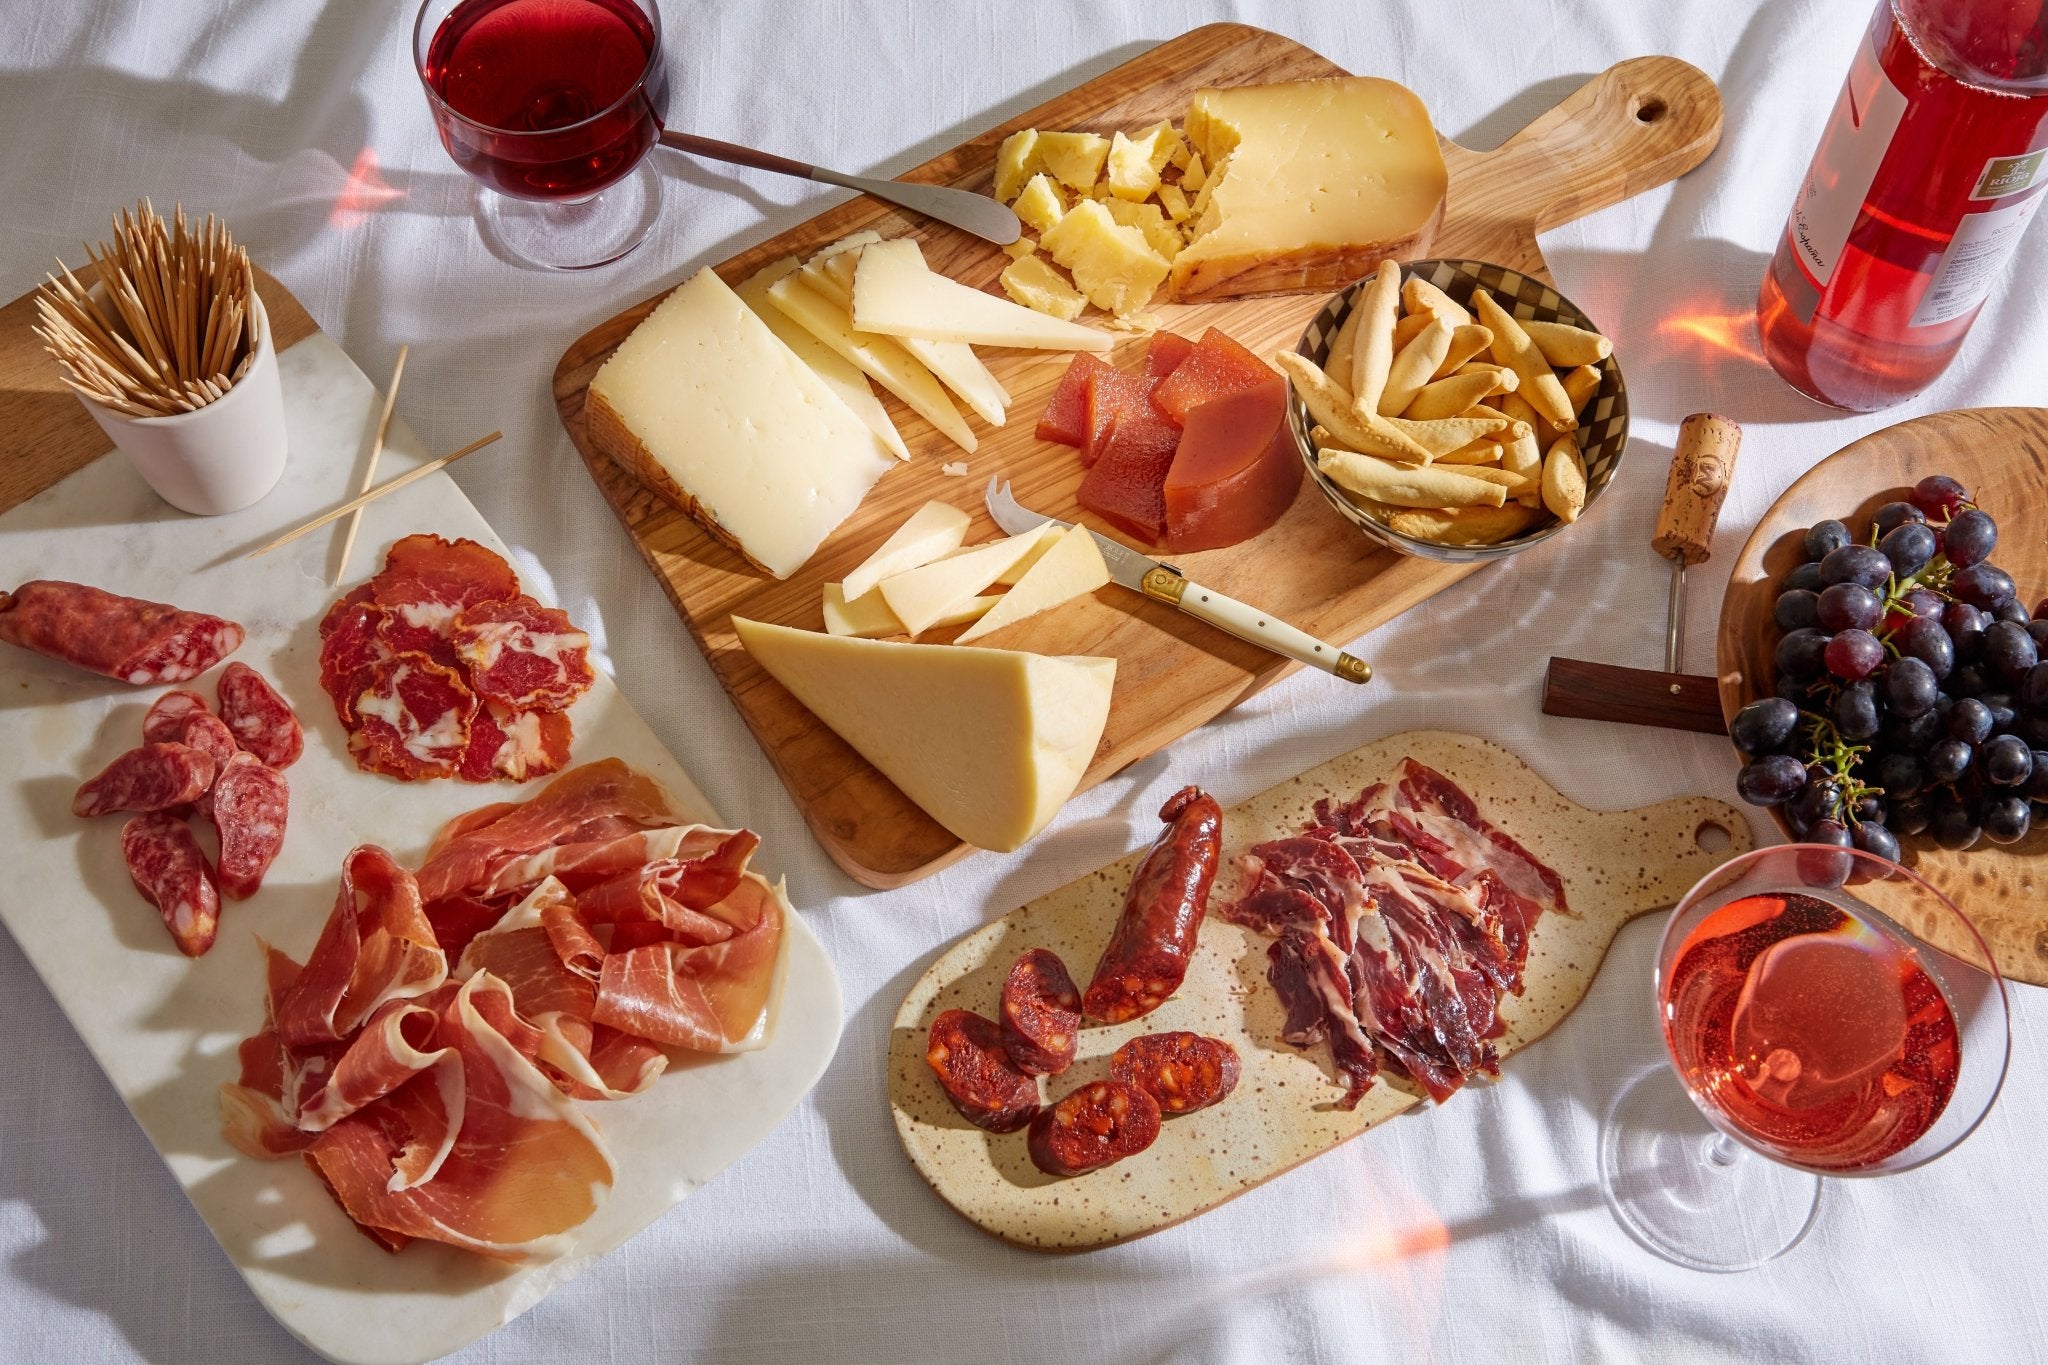 Meats & Cheeses - The Spanish Table